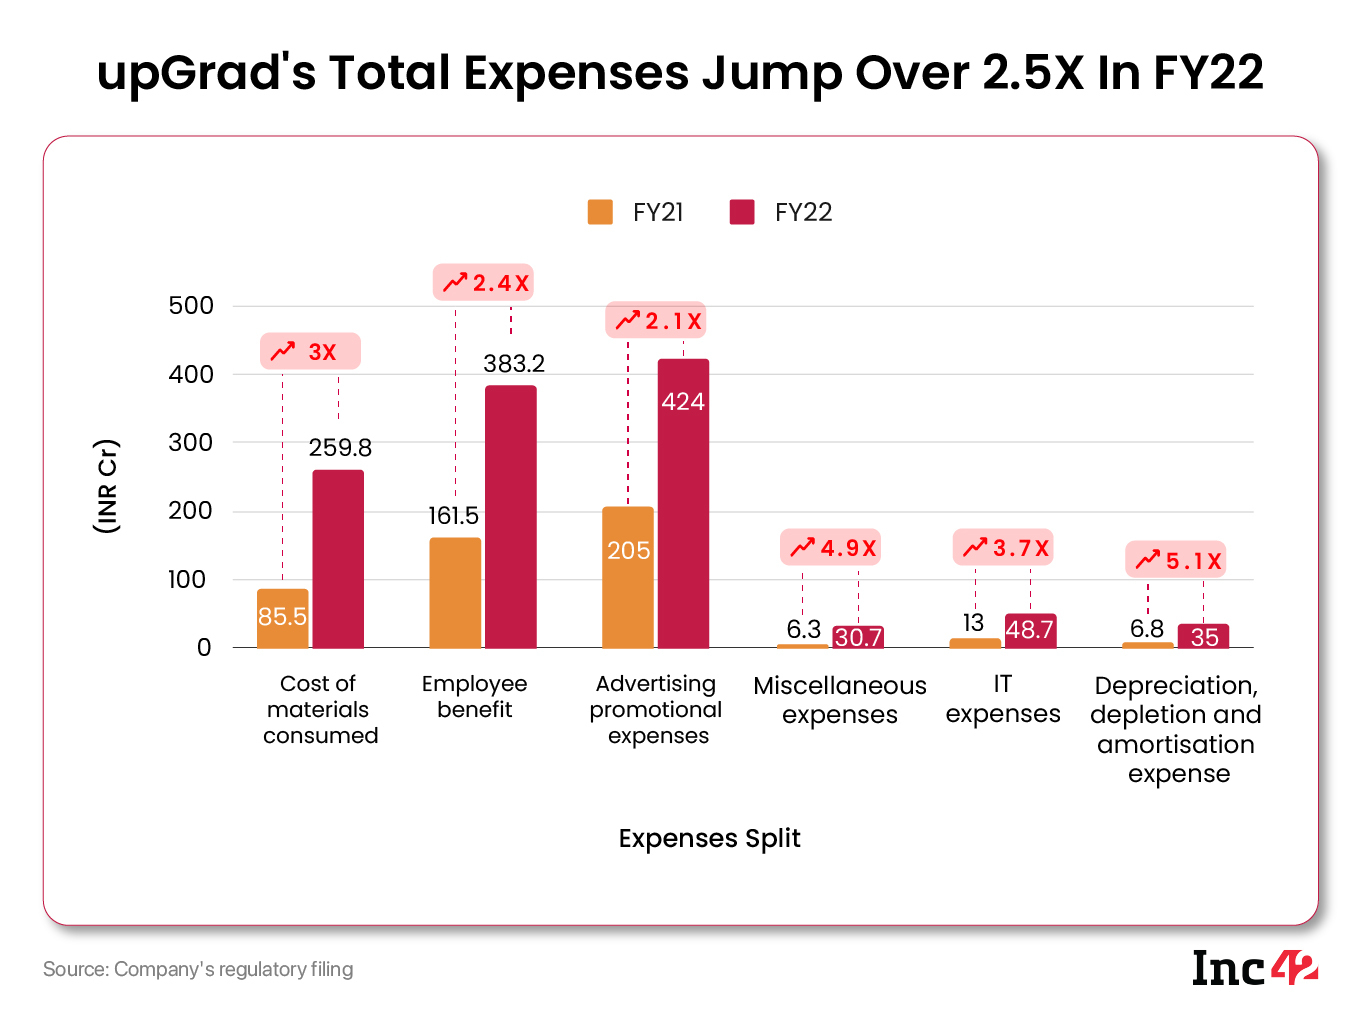 Upgrad total expenses jump over 2.5X in FY22